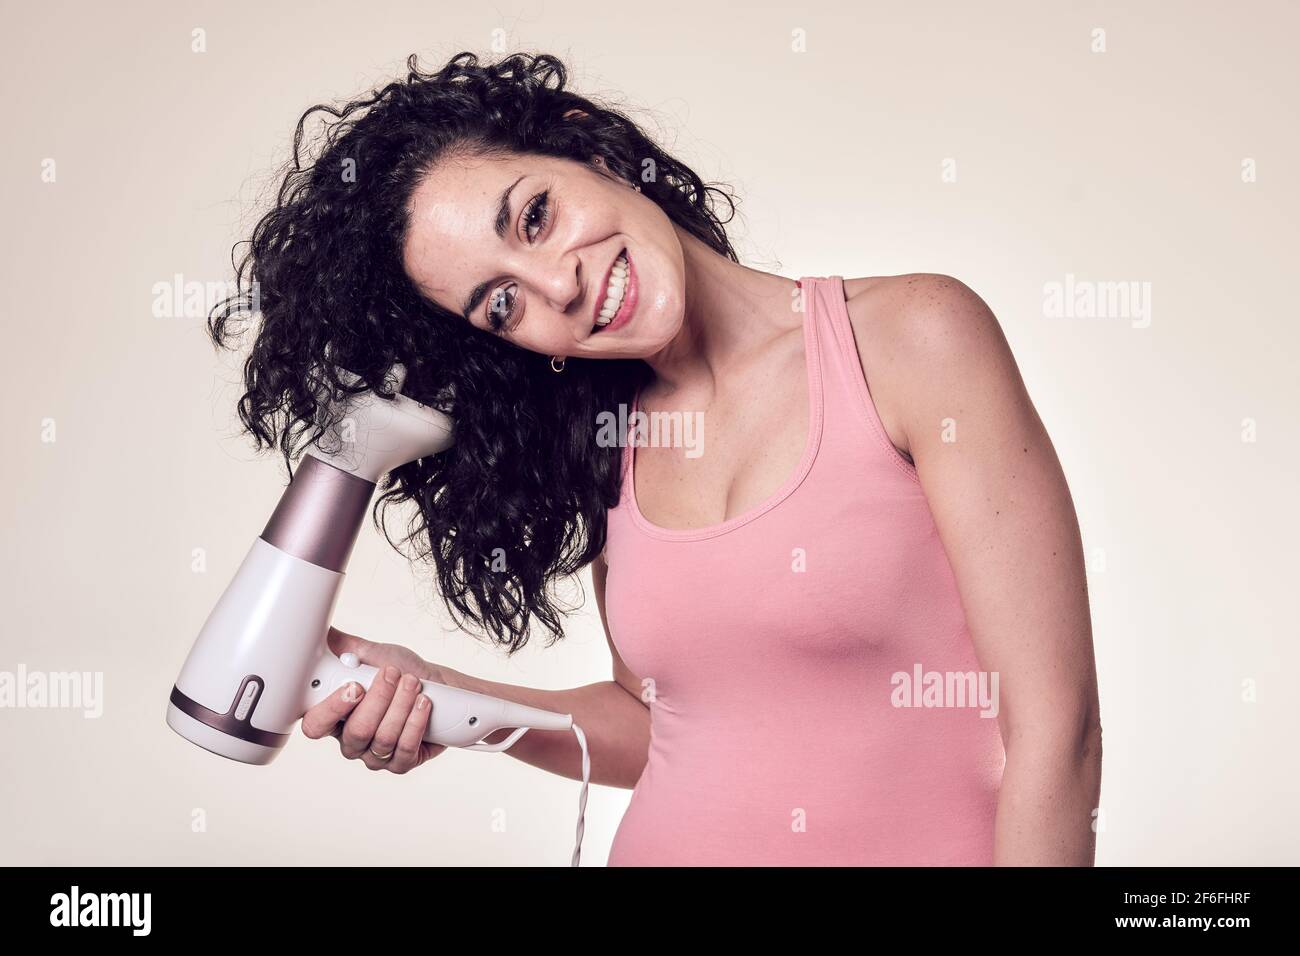 Young smiling curly haired woman follows the curly girl method with suitable curly hair care products using a blow dryer to get curls in her hair. car Stock Photo